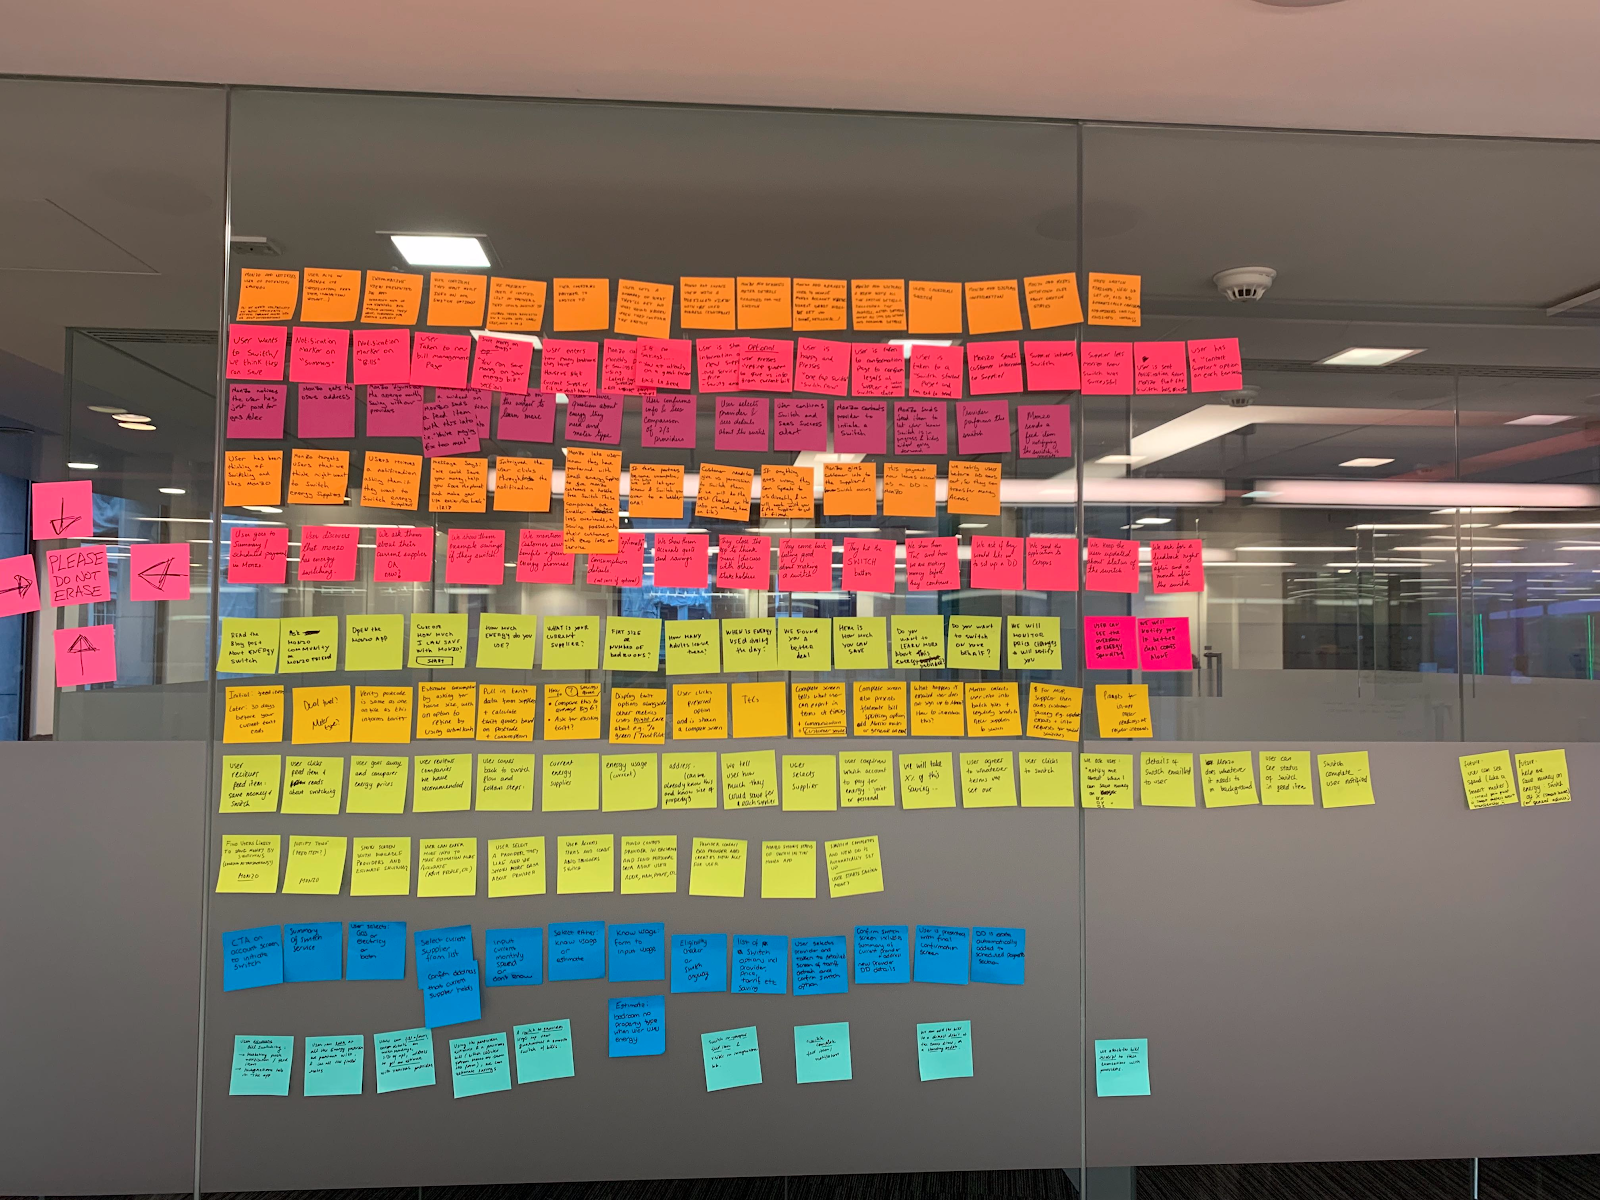 Post it notes showing user mapping